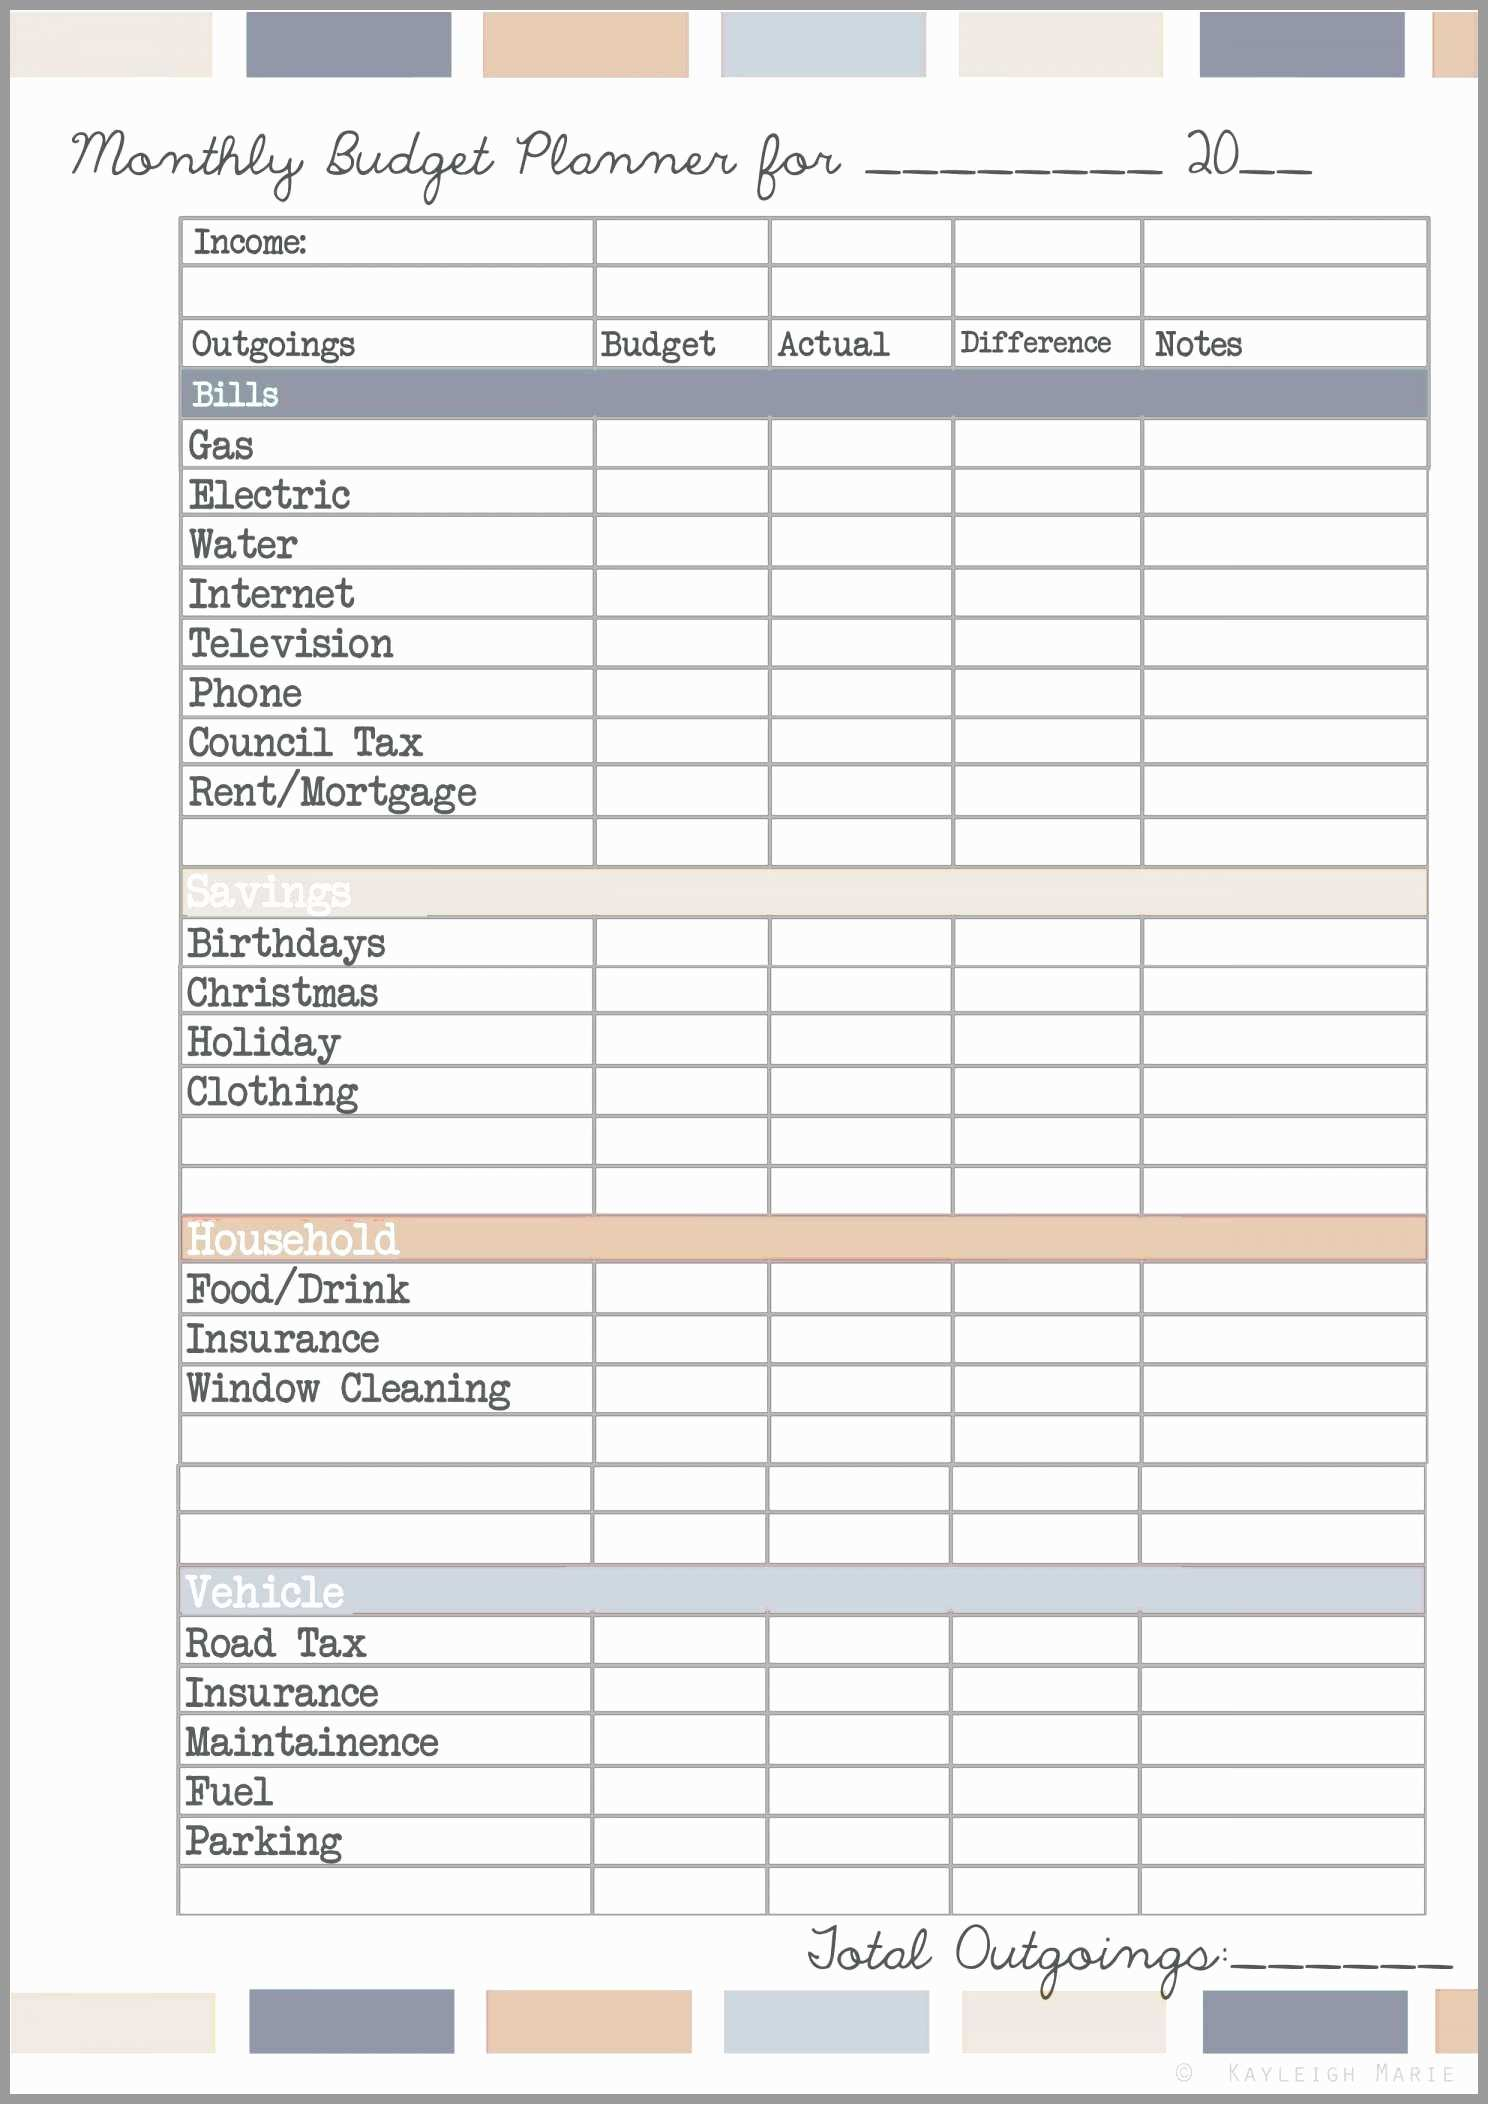 Parts Inventory Spreadsheet Template Intended For Inventory Spreadsheet Template Excel Admirable Stock Sheet In Excel